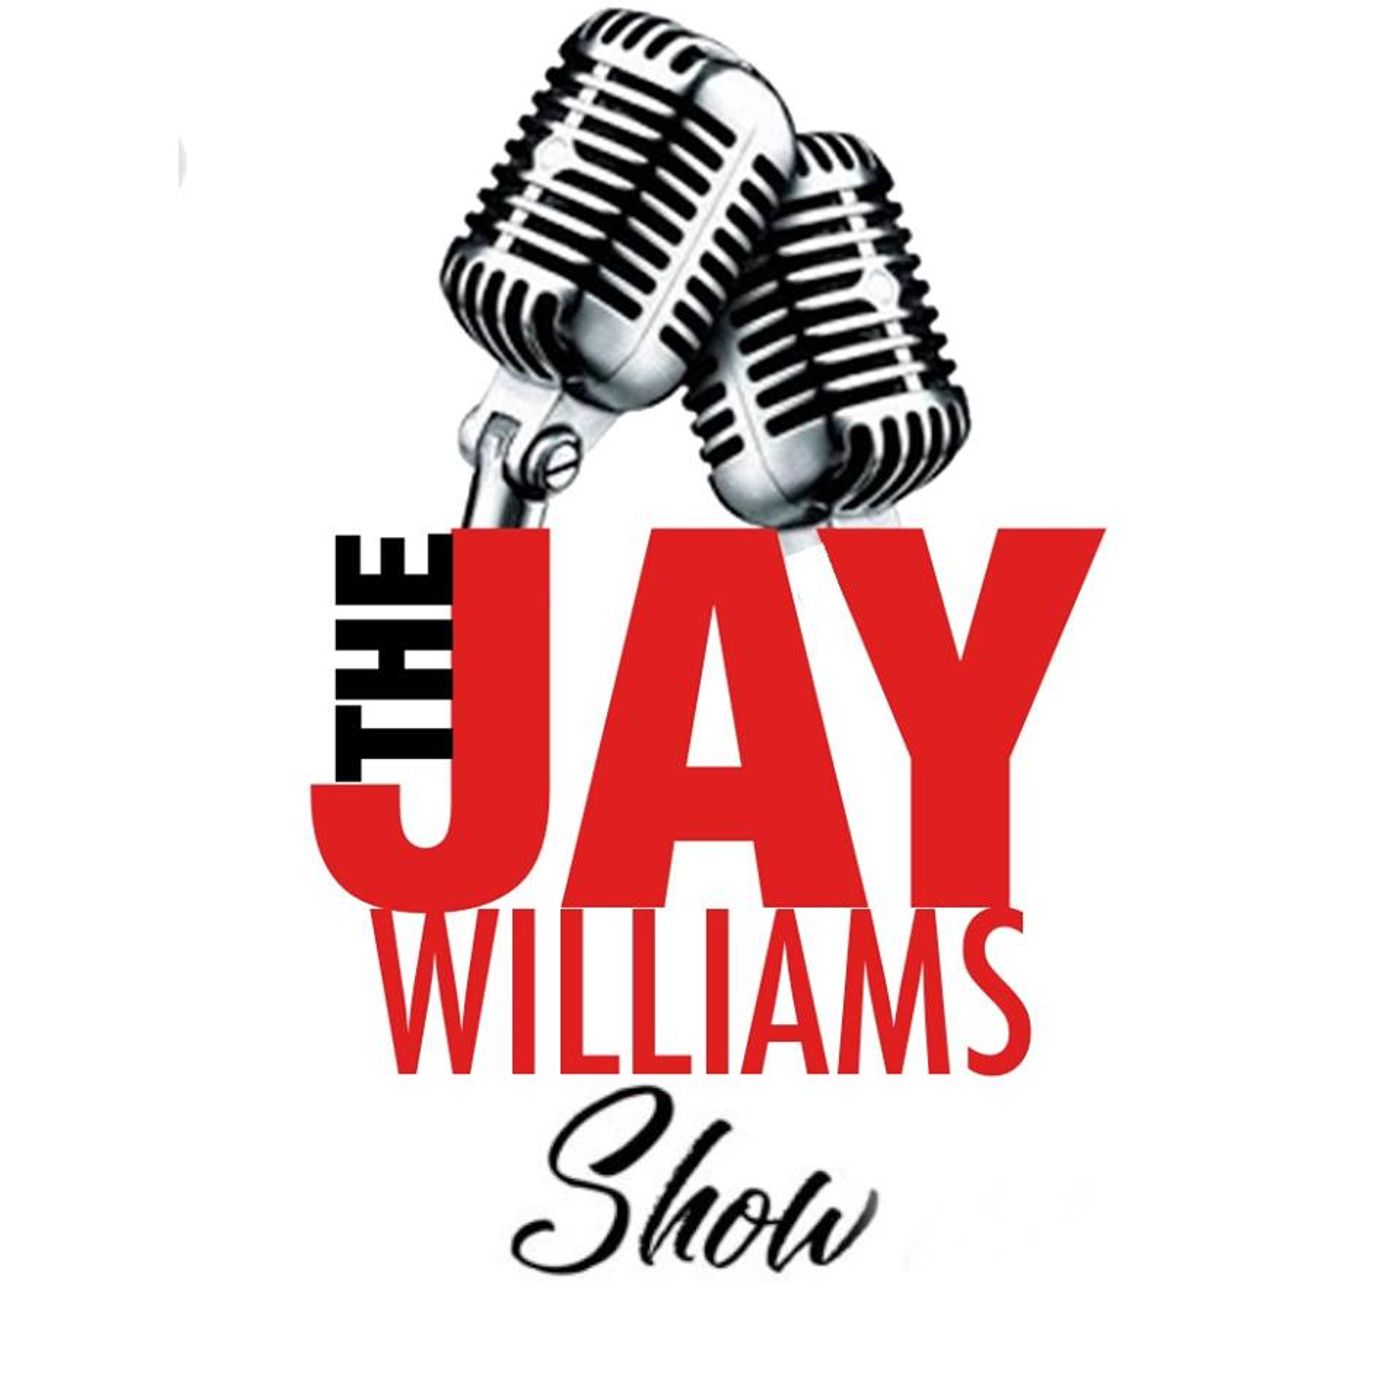 THE JAY WILLIAMS SHOW